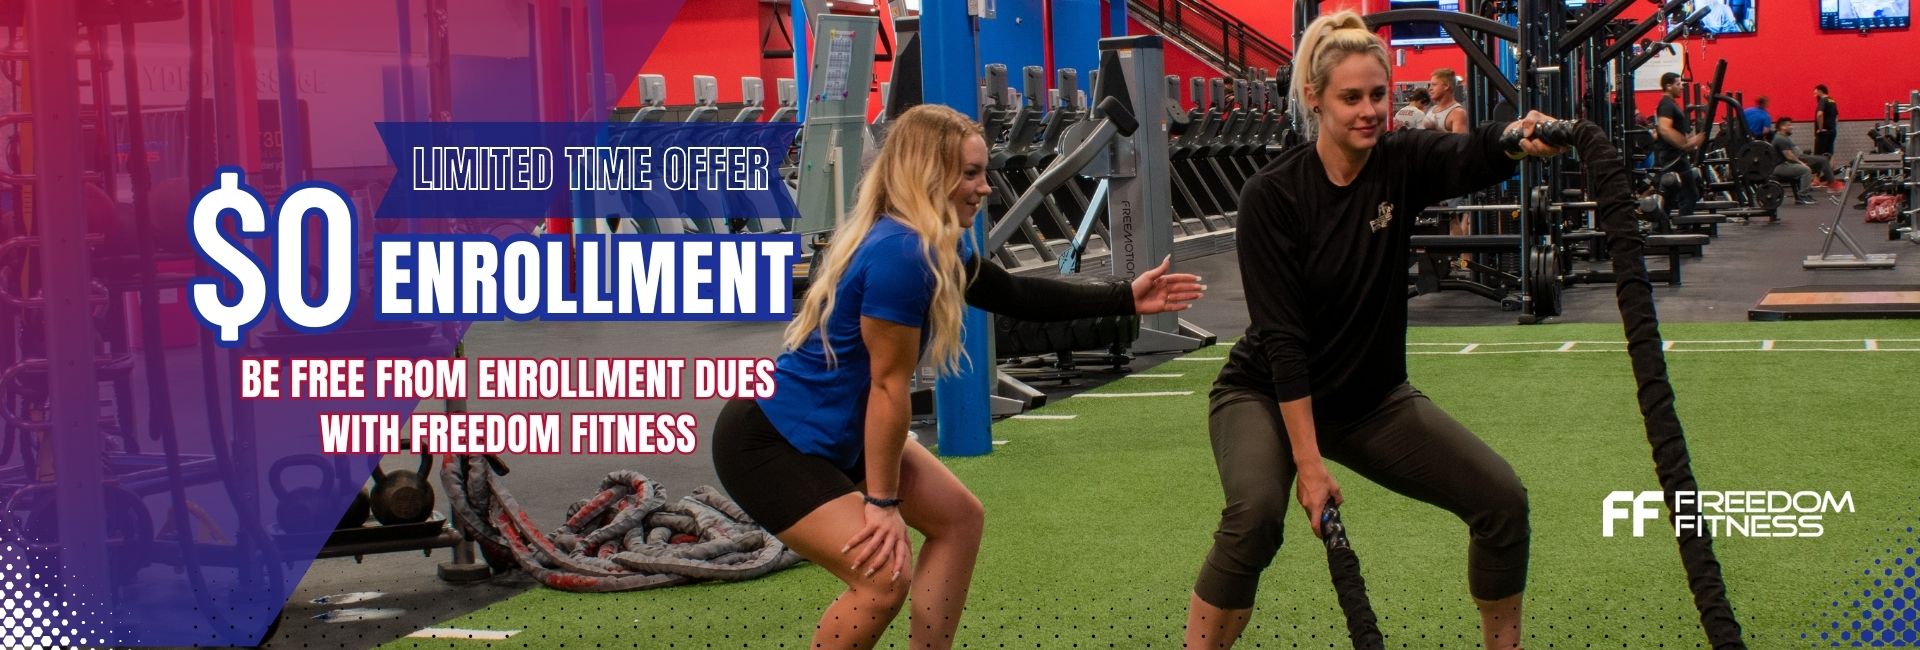 Certified private trainer helping a member with a battle ropes exercise at a Freedom Fitness gym near me with a $0 Enrollment Membership offer